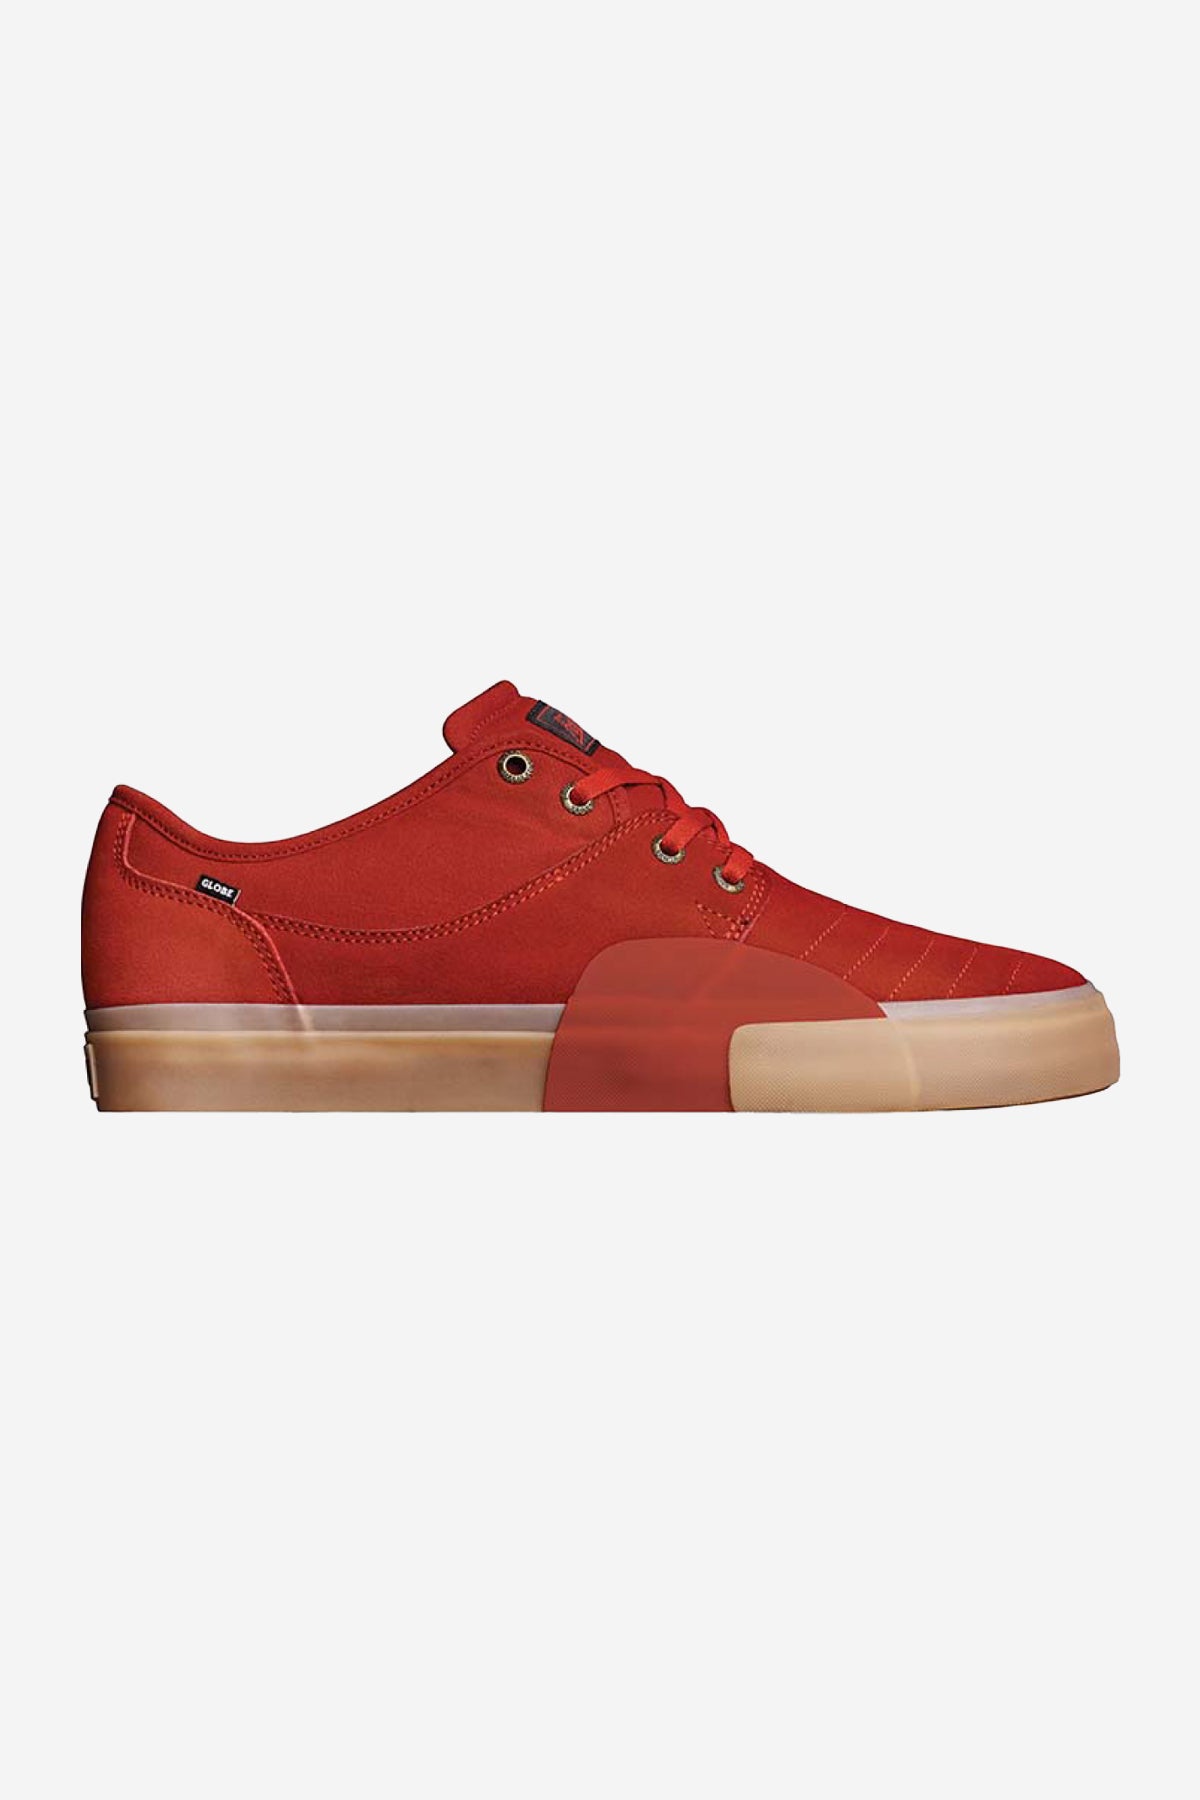 mahalo plus red gum skate shoes